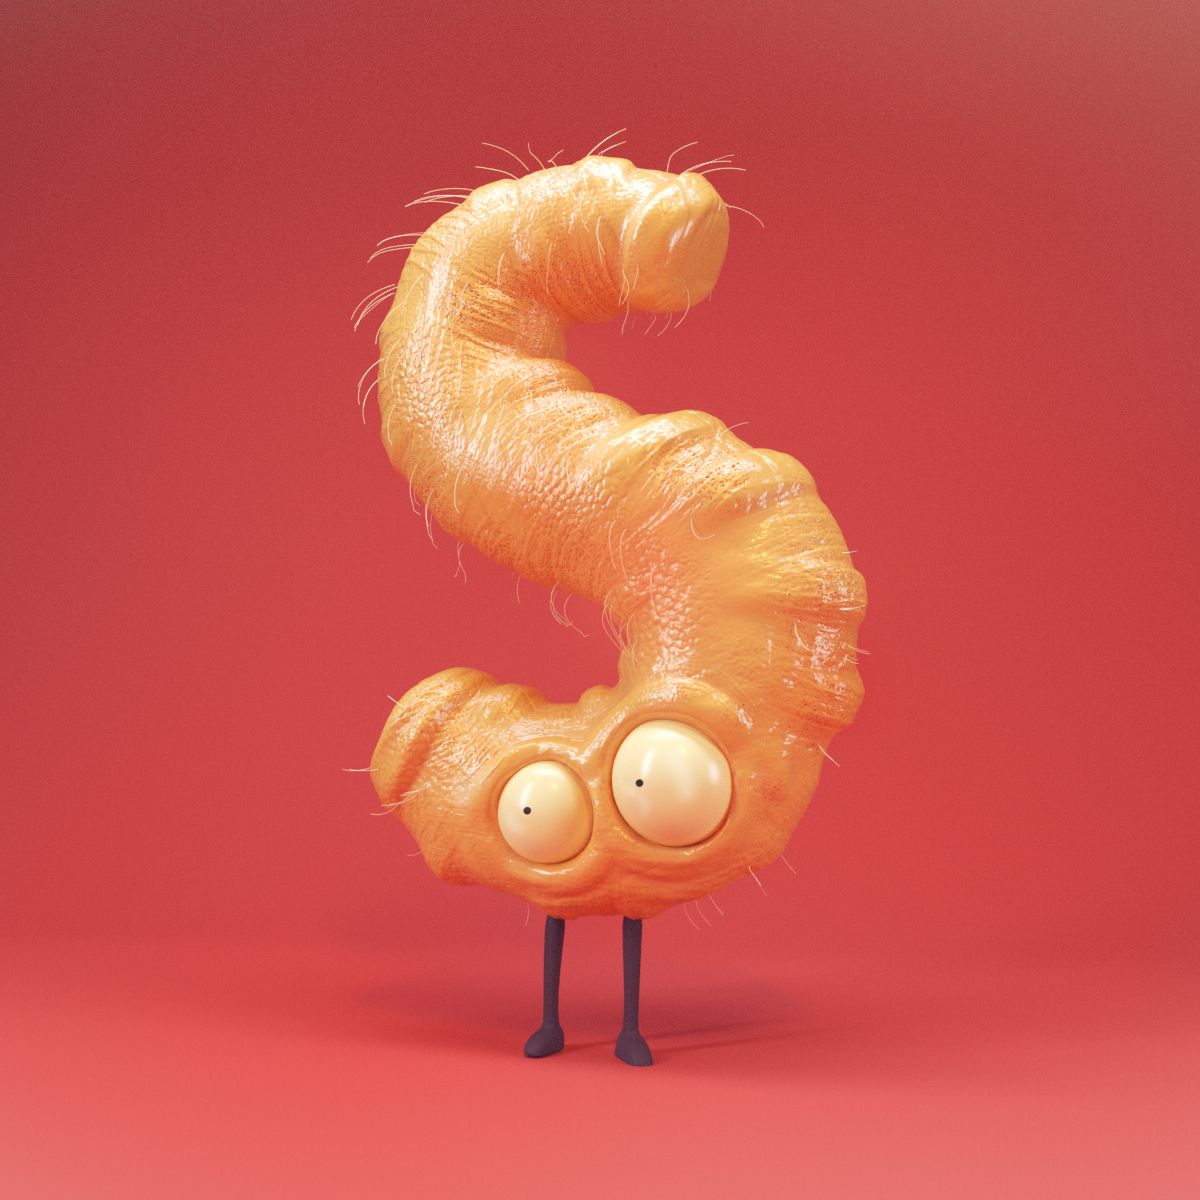 cinema4d monsters characters 36daysoftype typography   3D